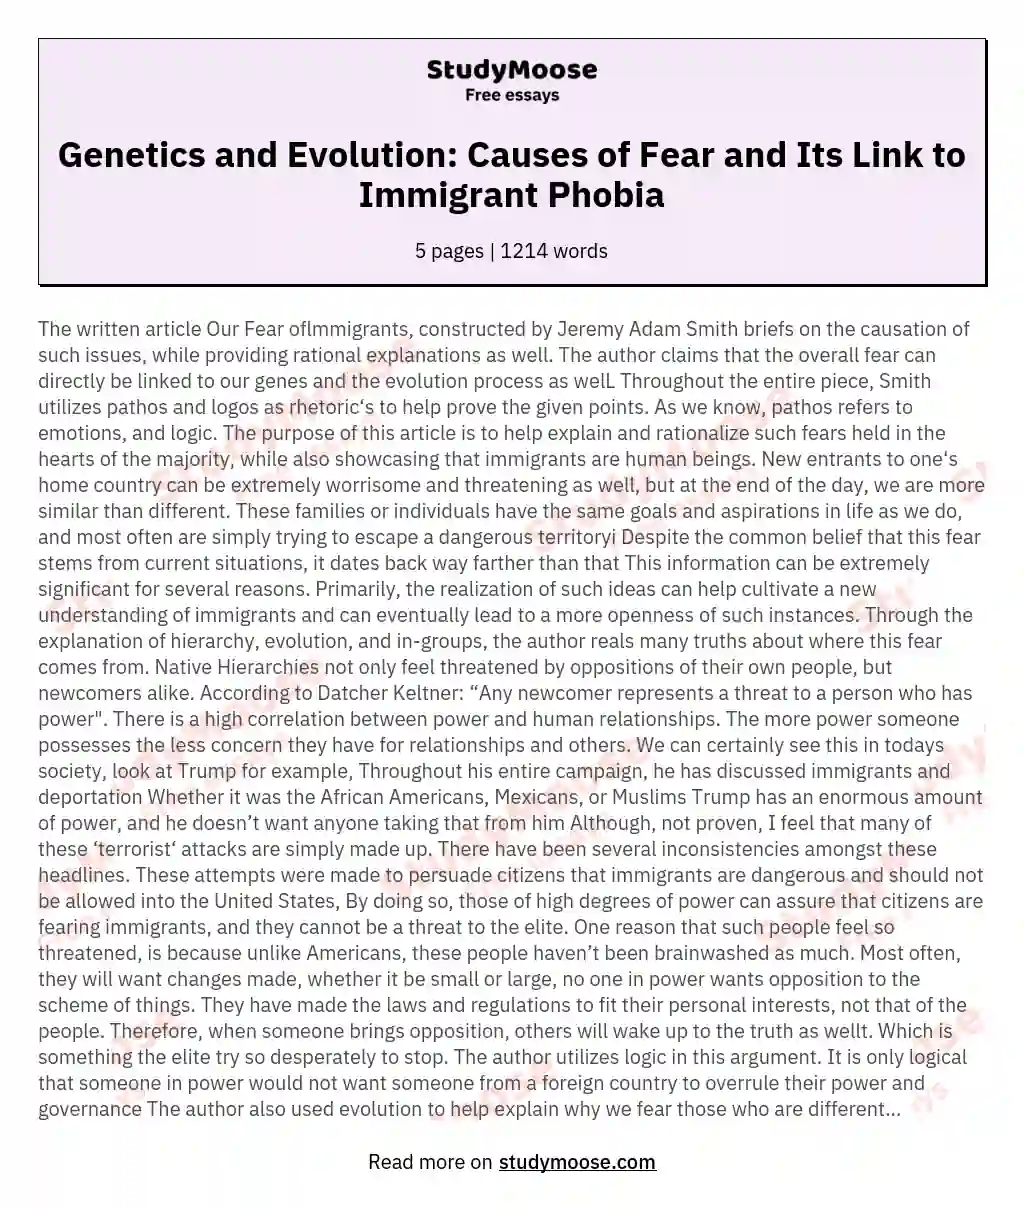 Genetics and Evolution: Causes of Fear and Its Link to Immigrant Phobia essay